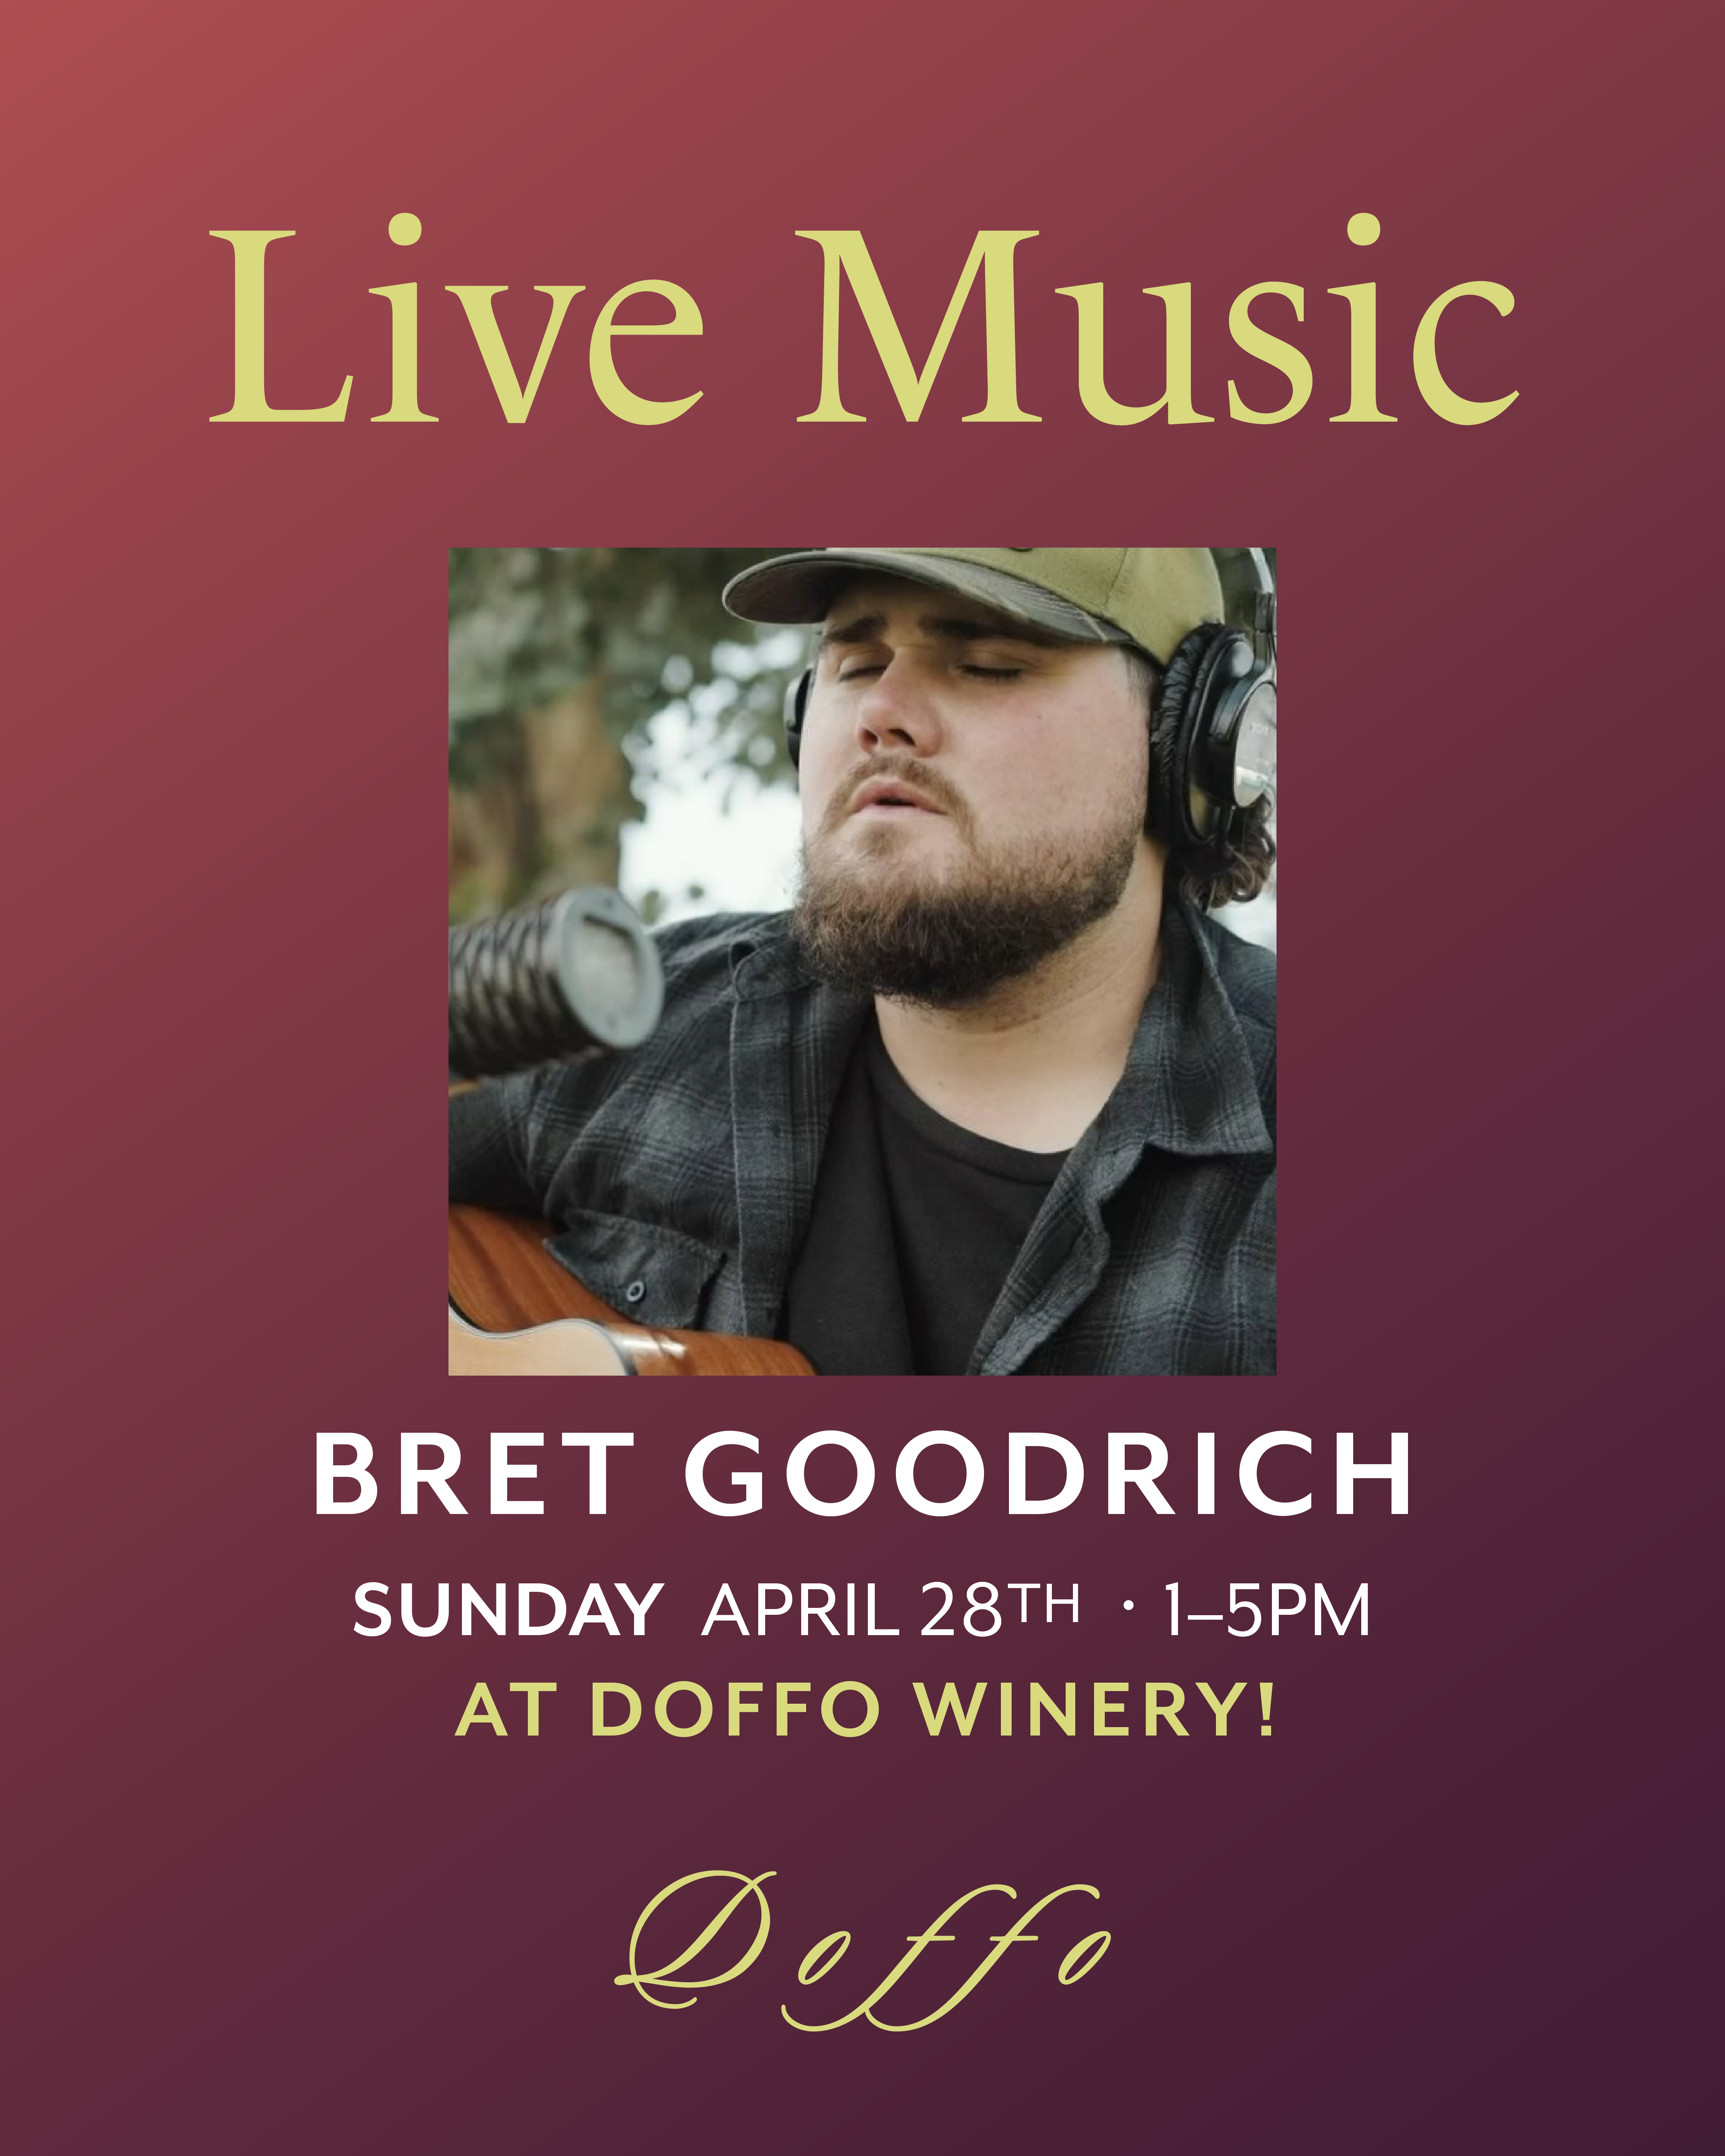 Live Music at the Doffo Winery | Bret Goodrich